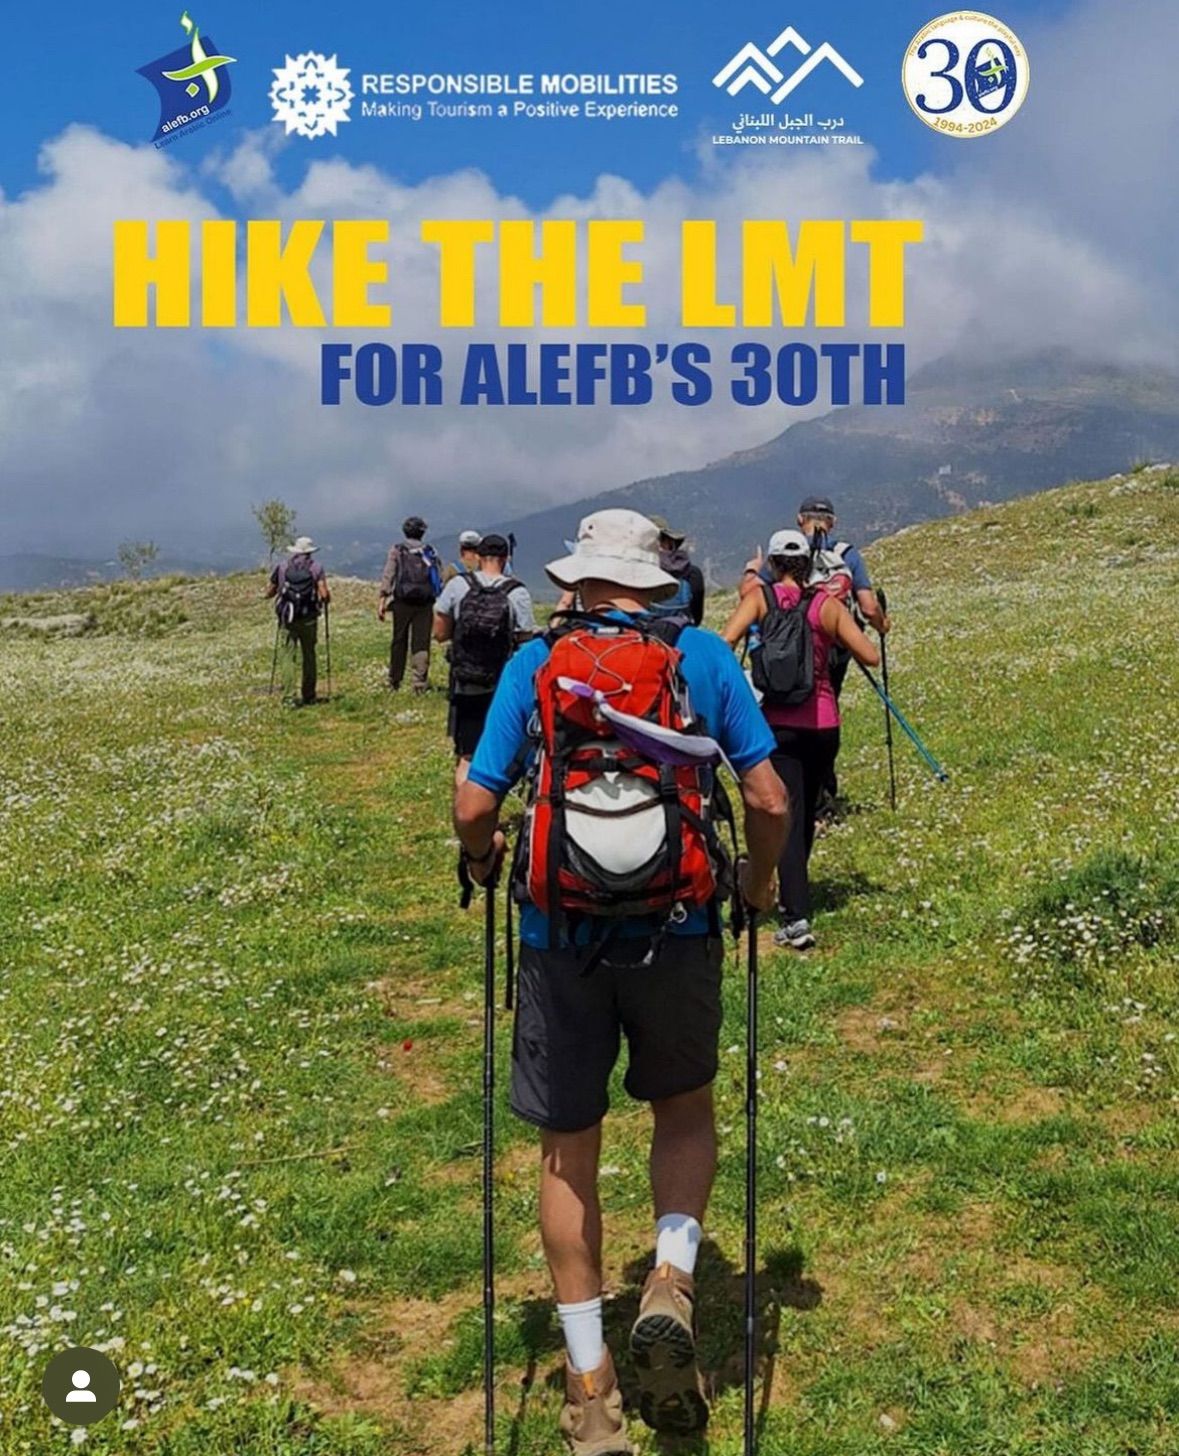 Hike the LMT for Alefb\u2019s 30th - September 10